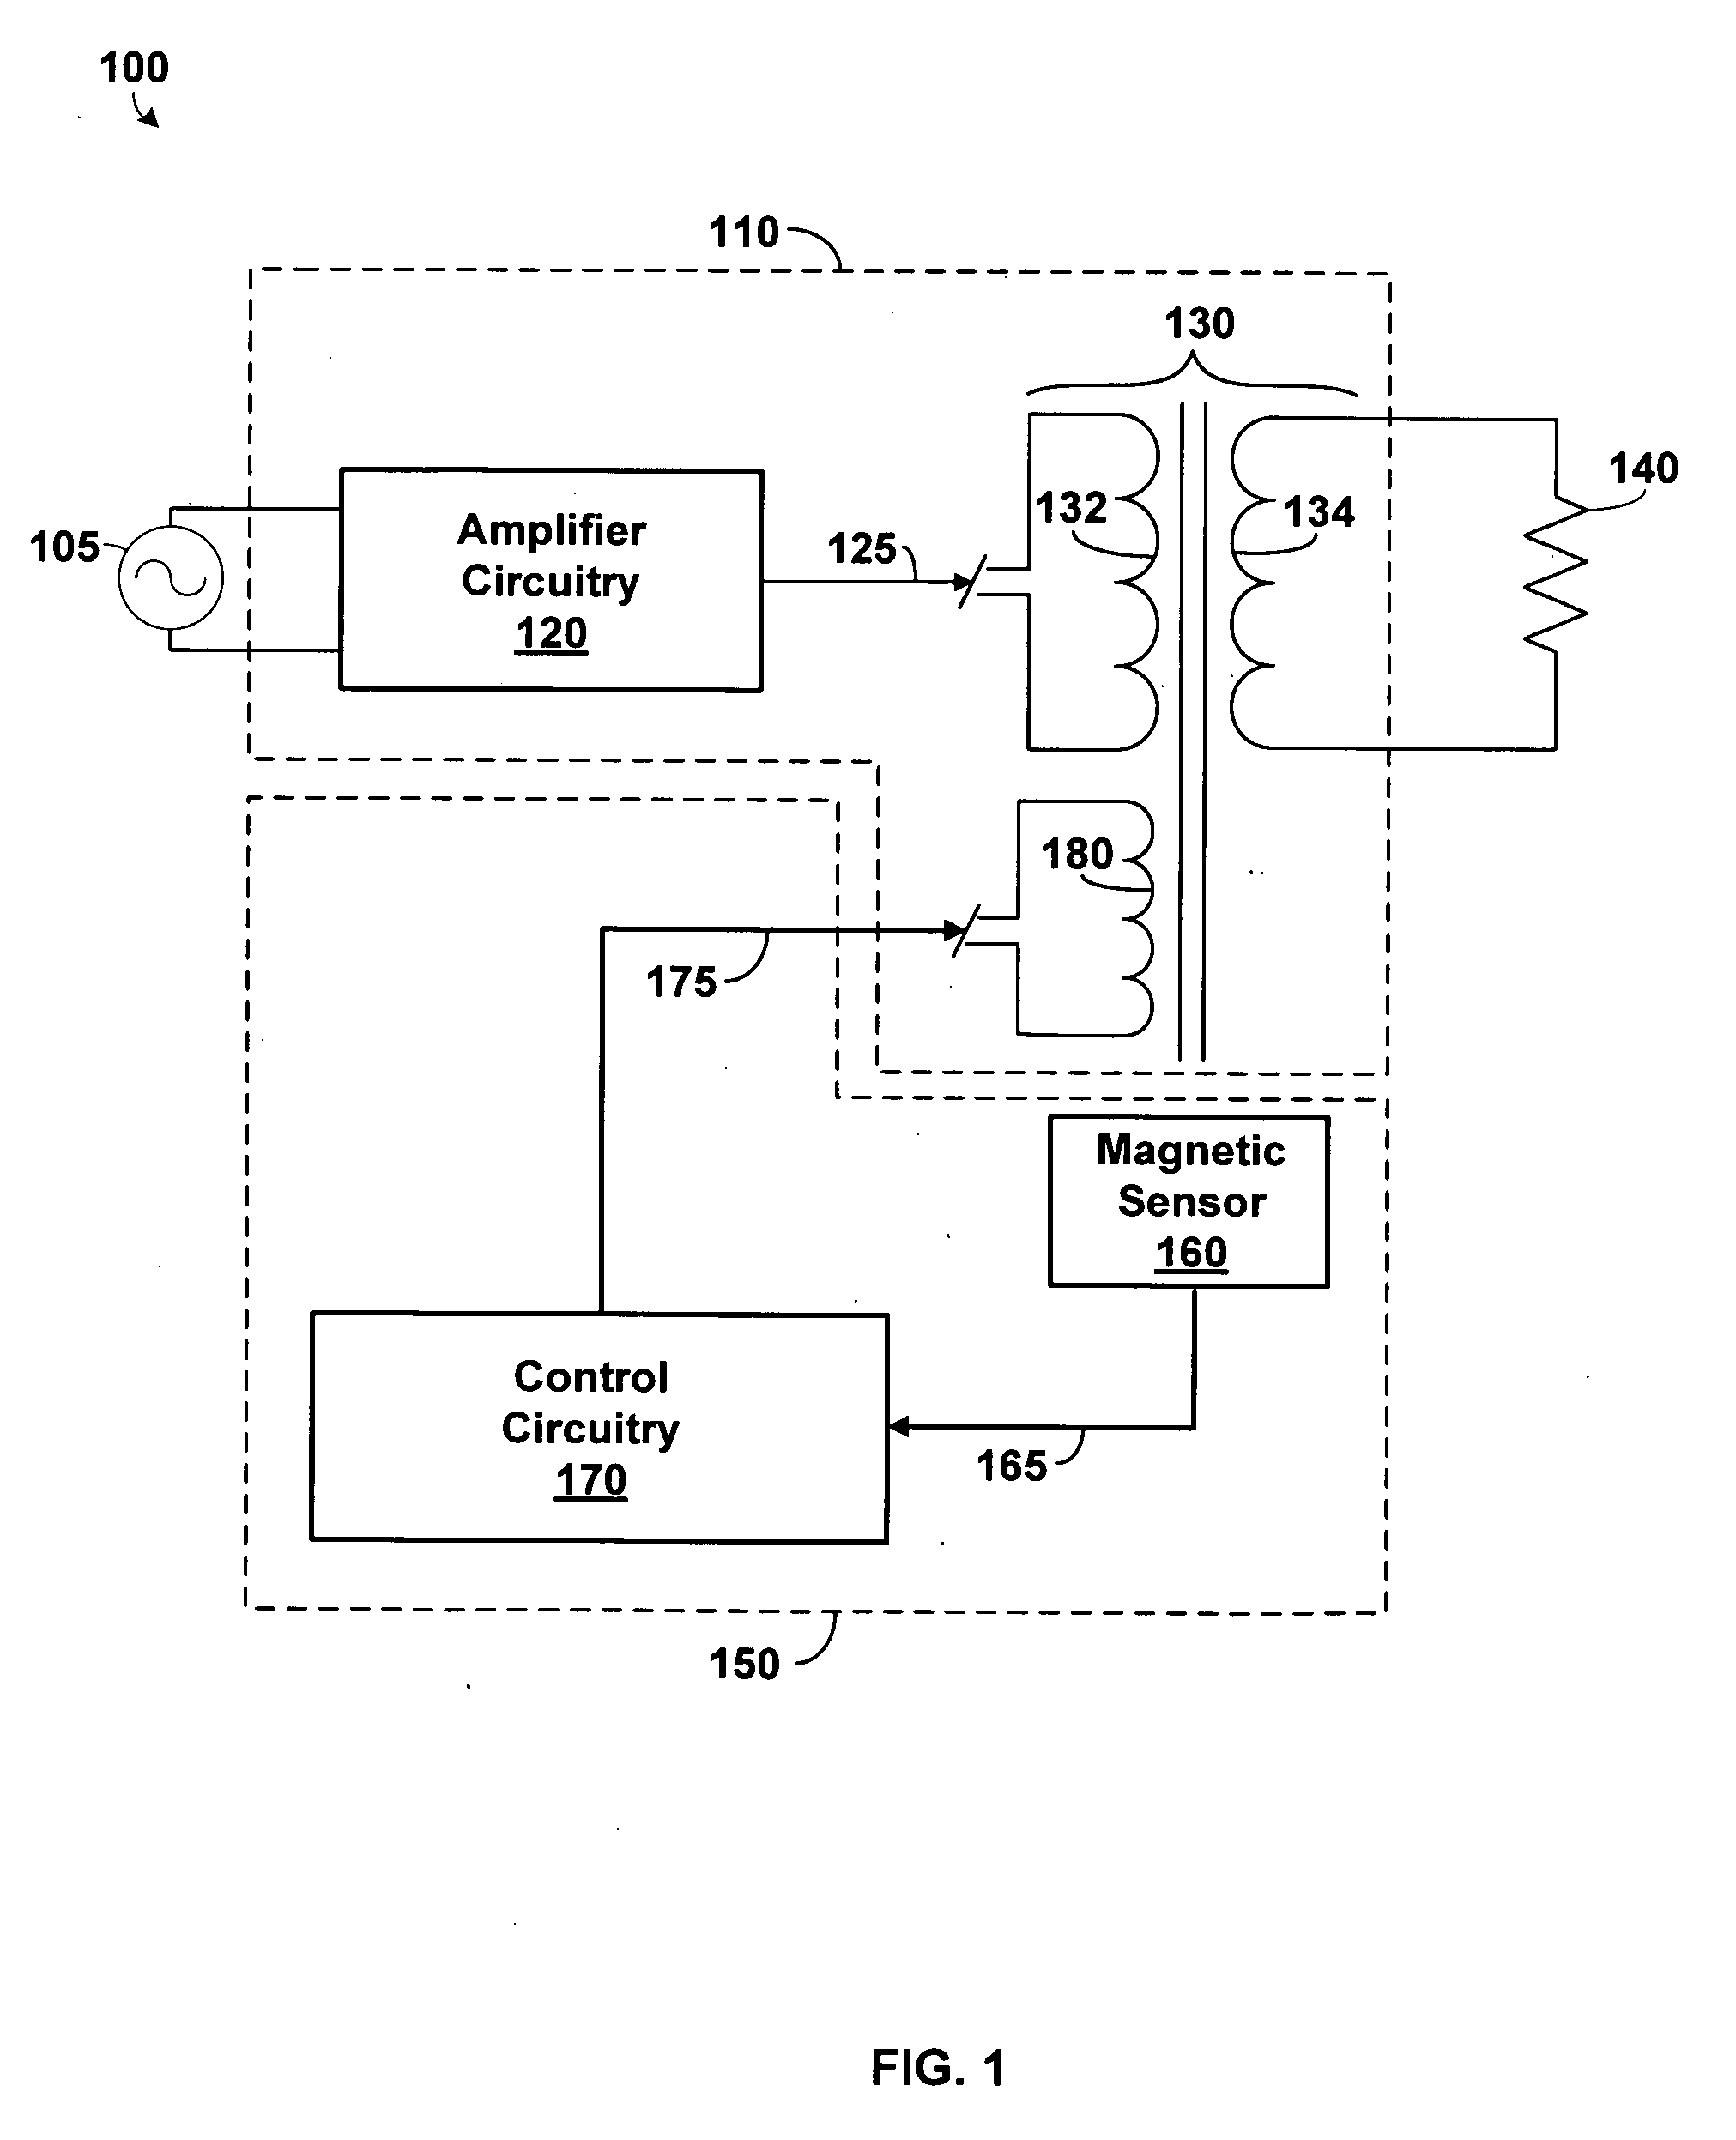 System and method for employing variable magnetic flux bias in an amplifier